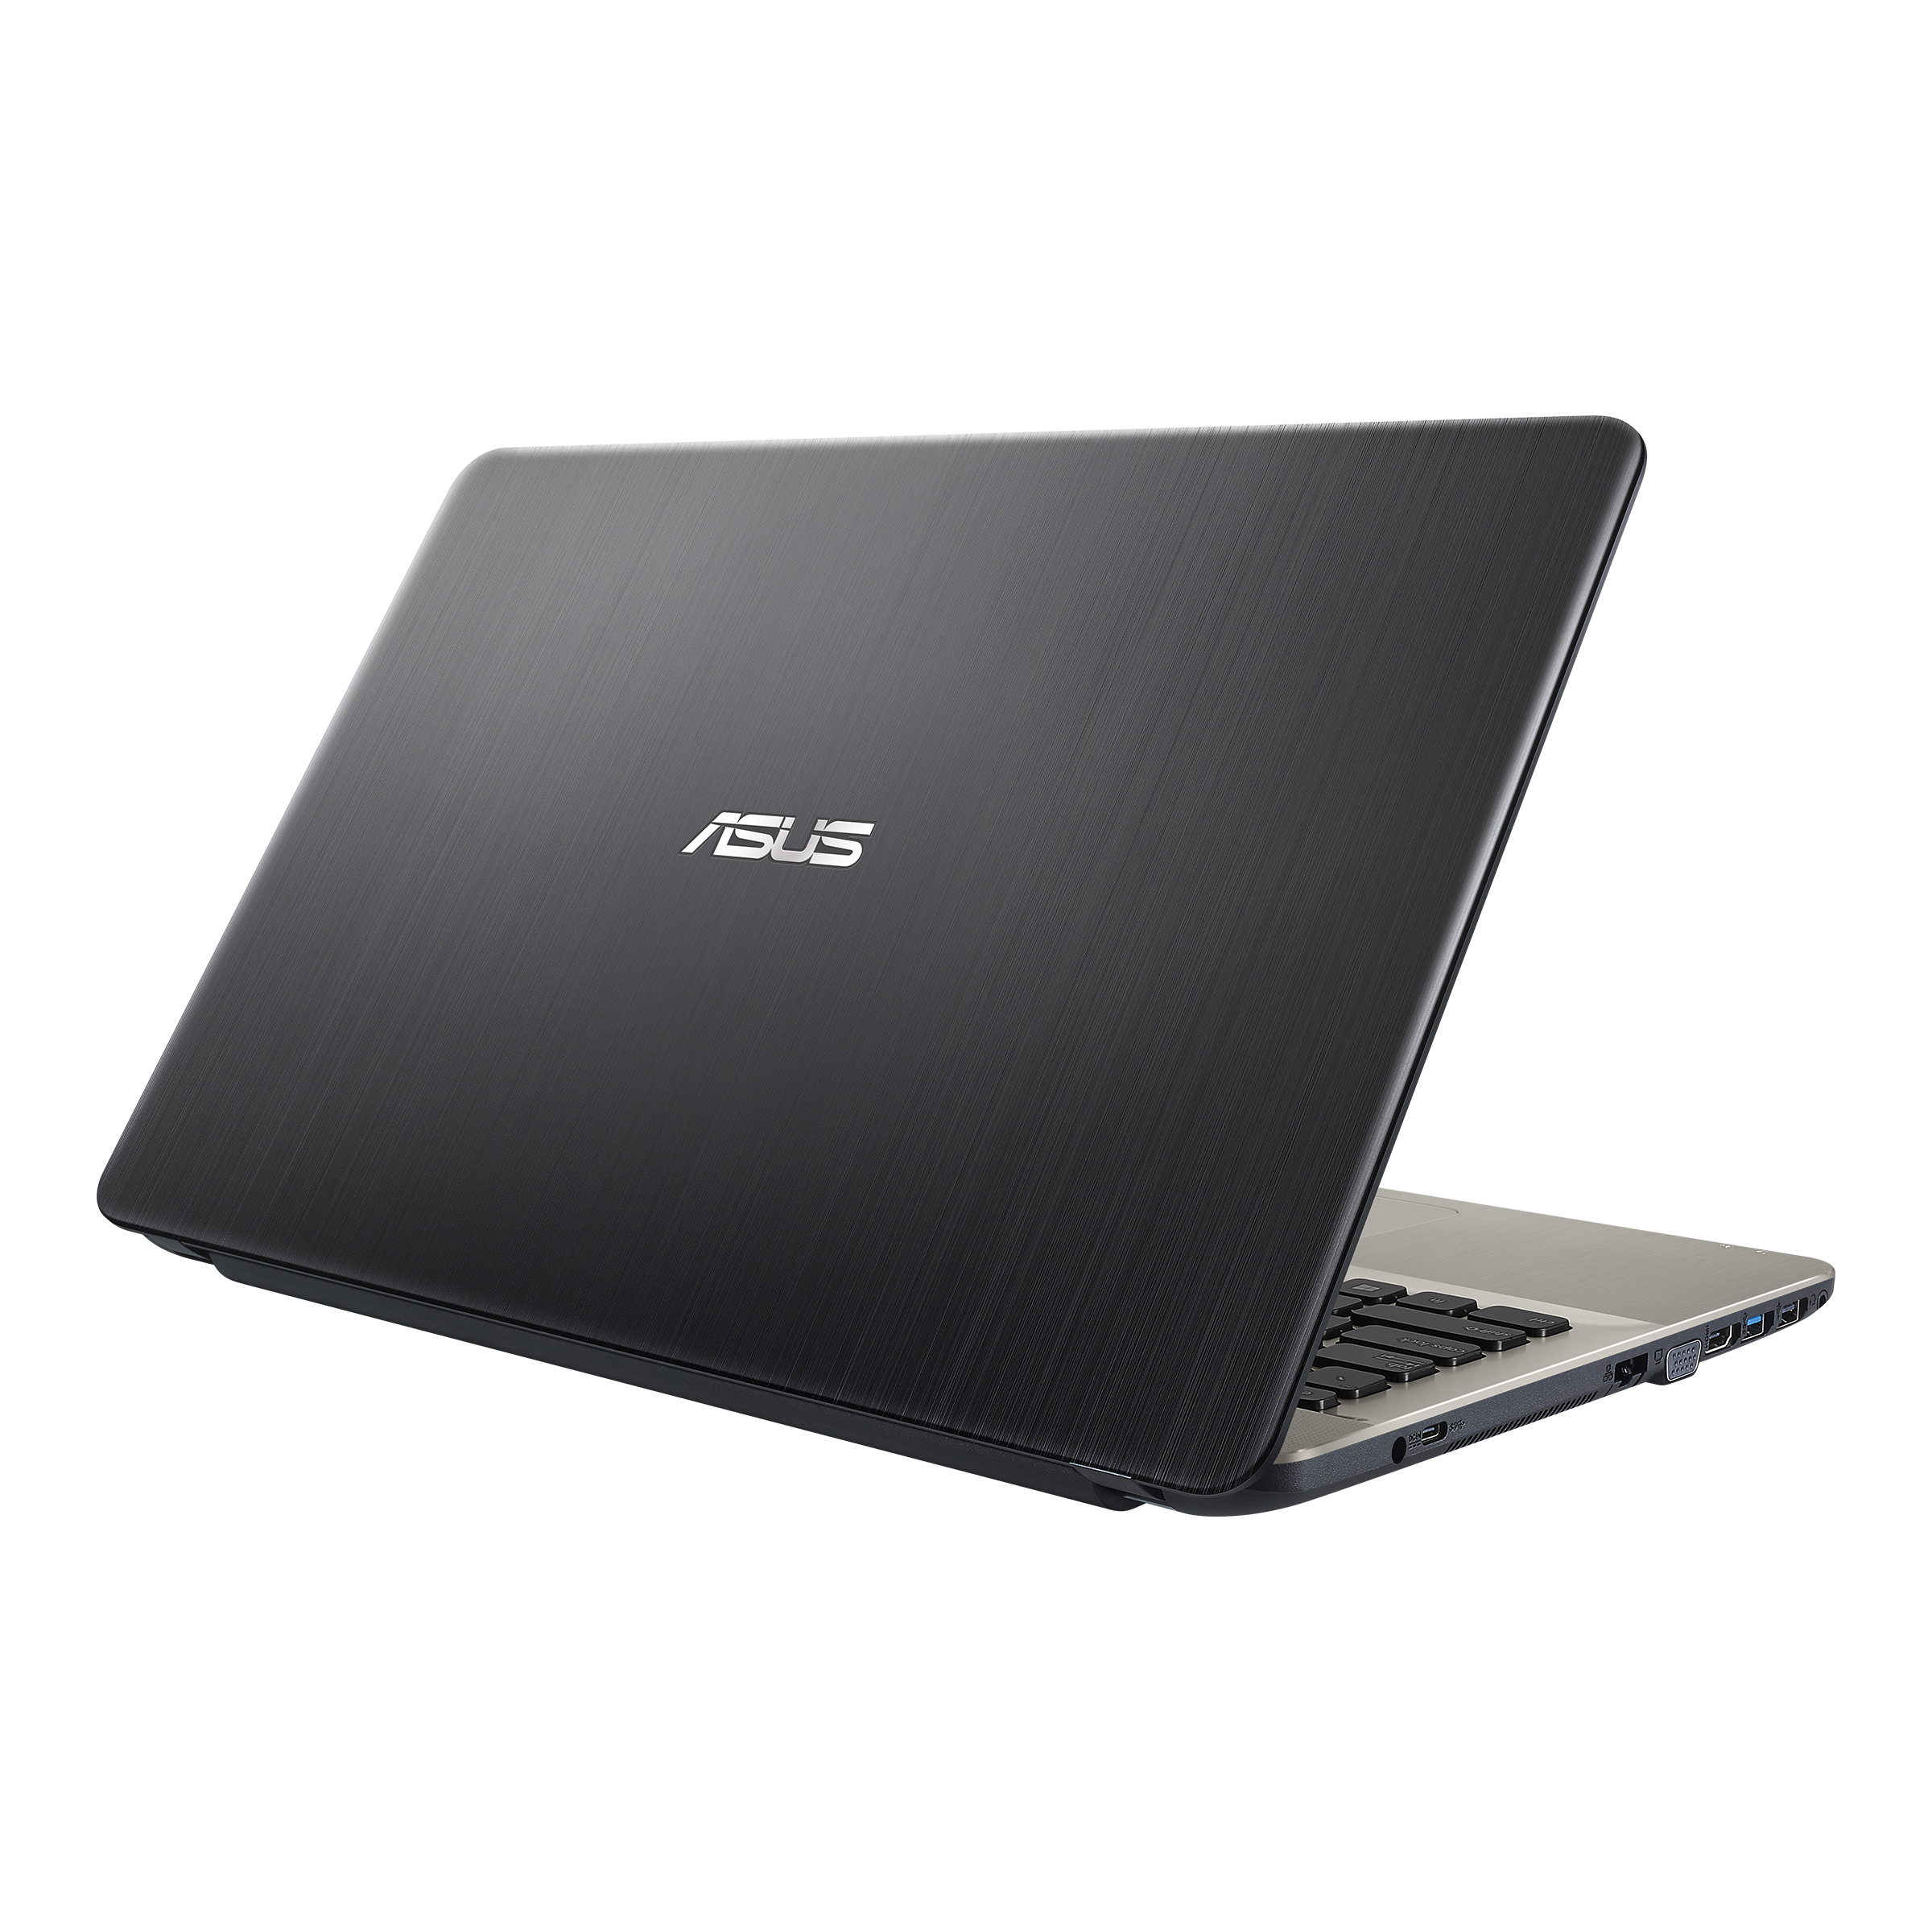 ASUS X541｜Laptops For Home｜ASUS Global